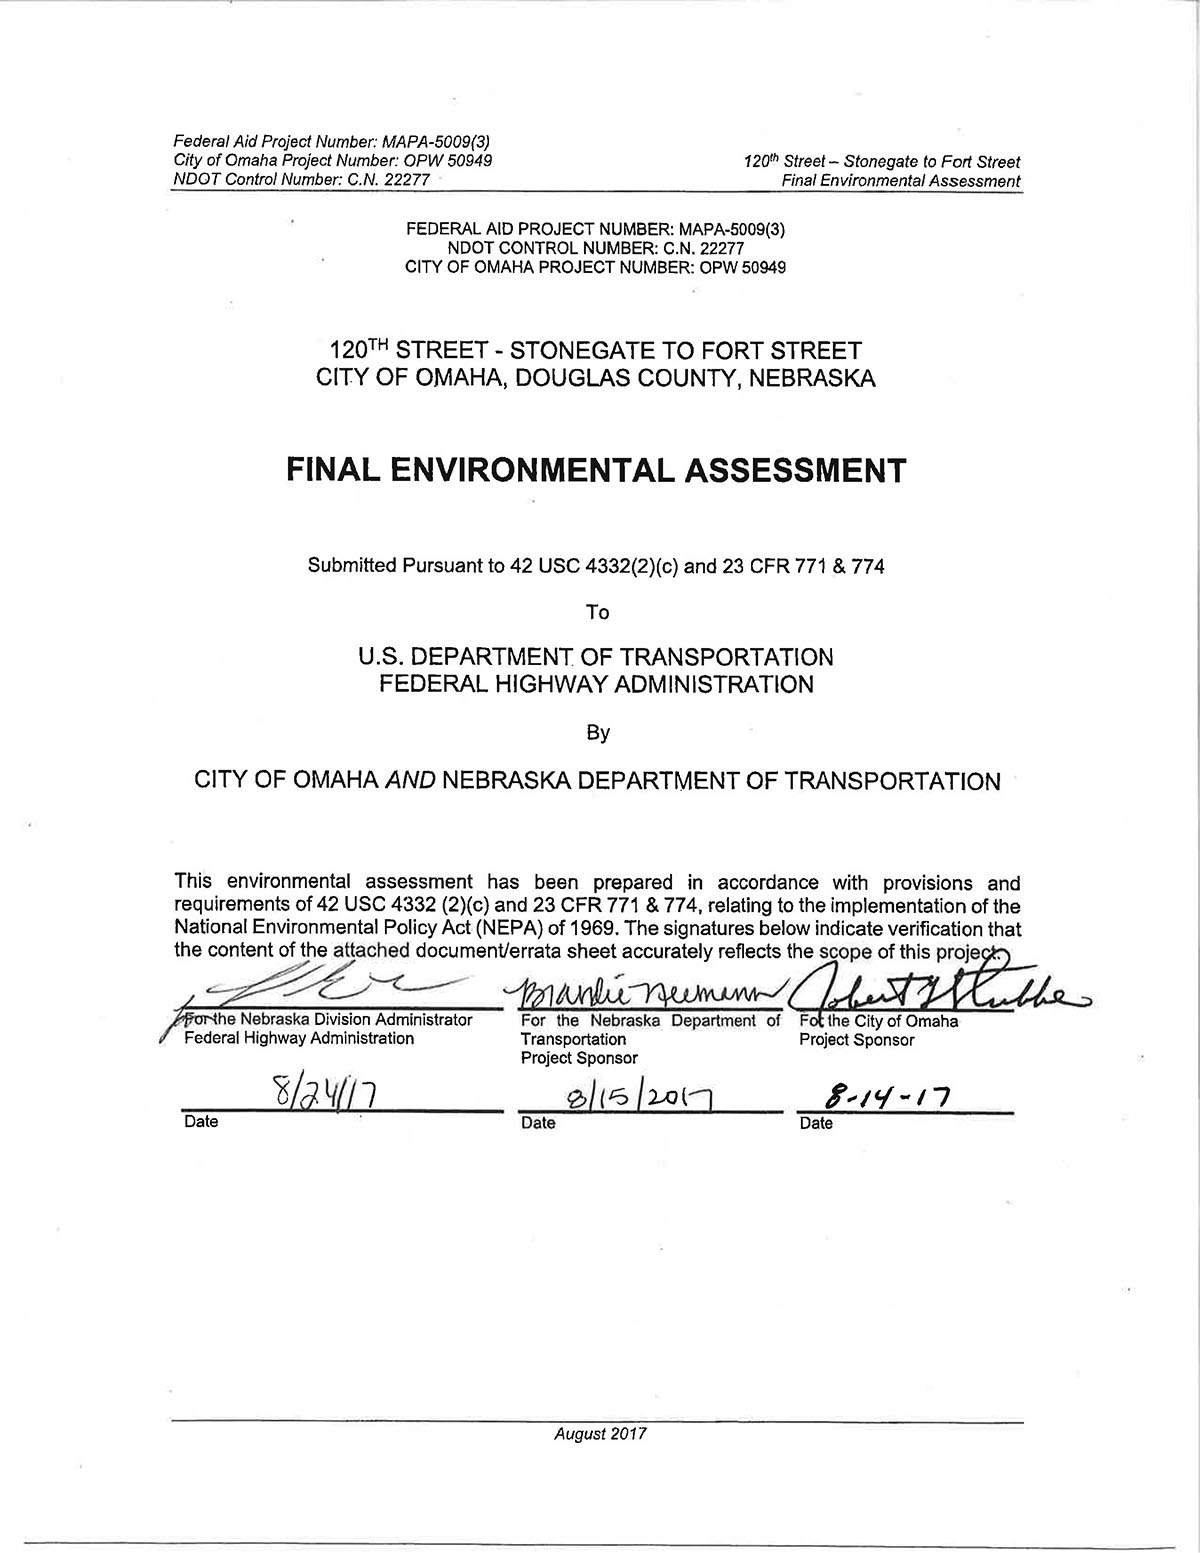 Environmental Assessment document page 2